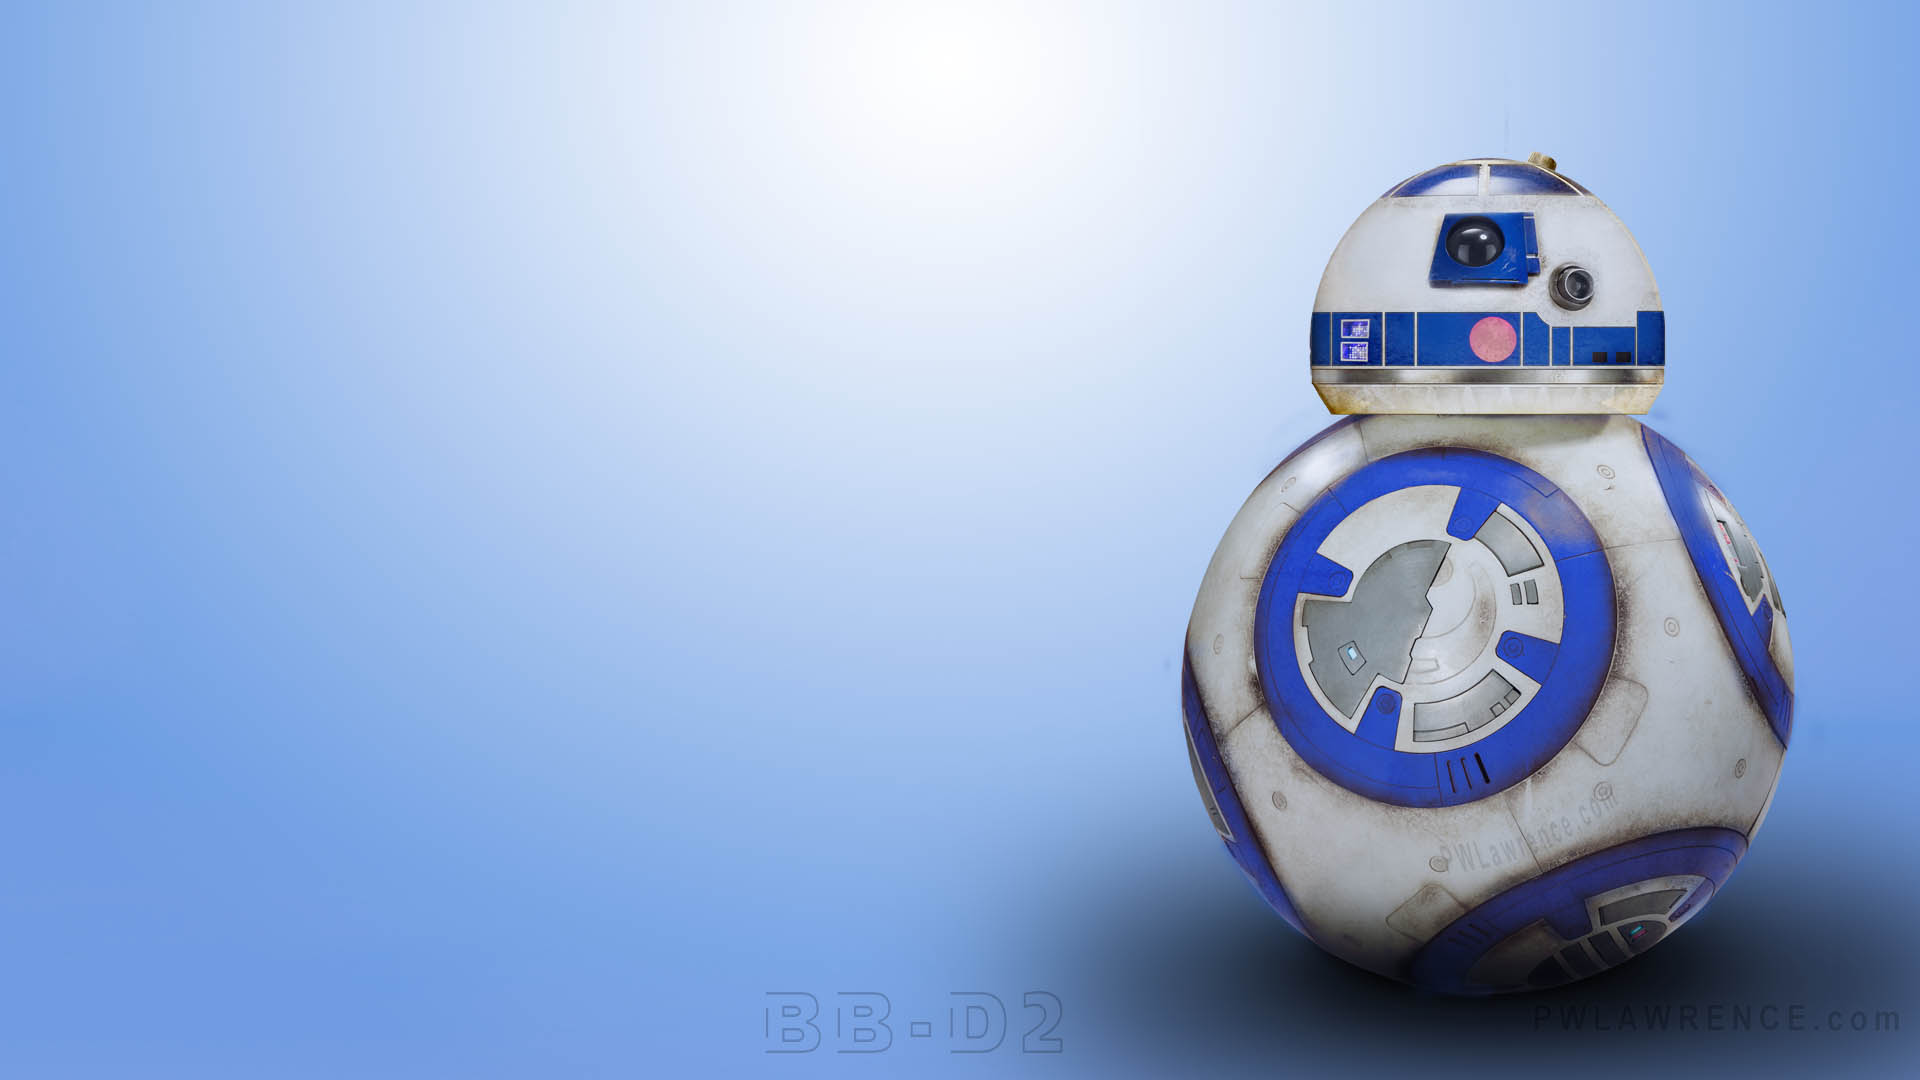 8 R2d2 Inspired D2 Droid Wallpaper Patrick Lawrence S Art Blog And Portfolio